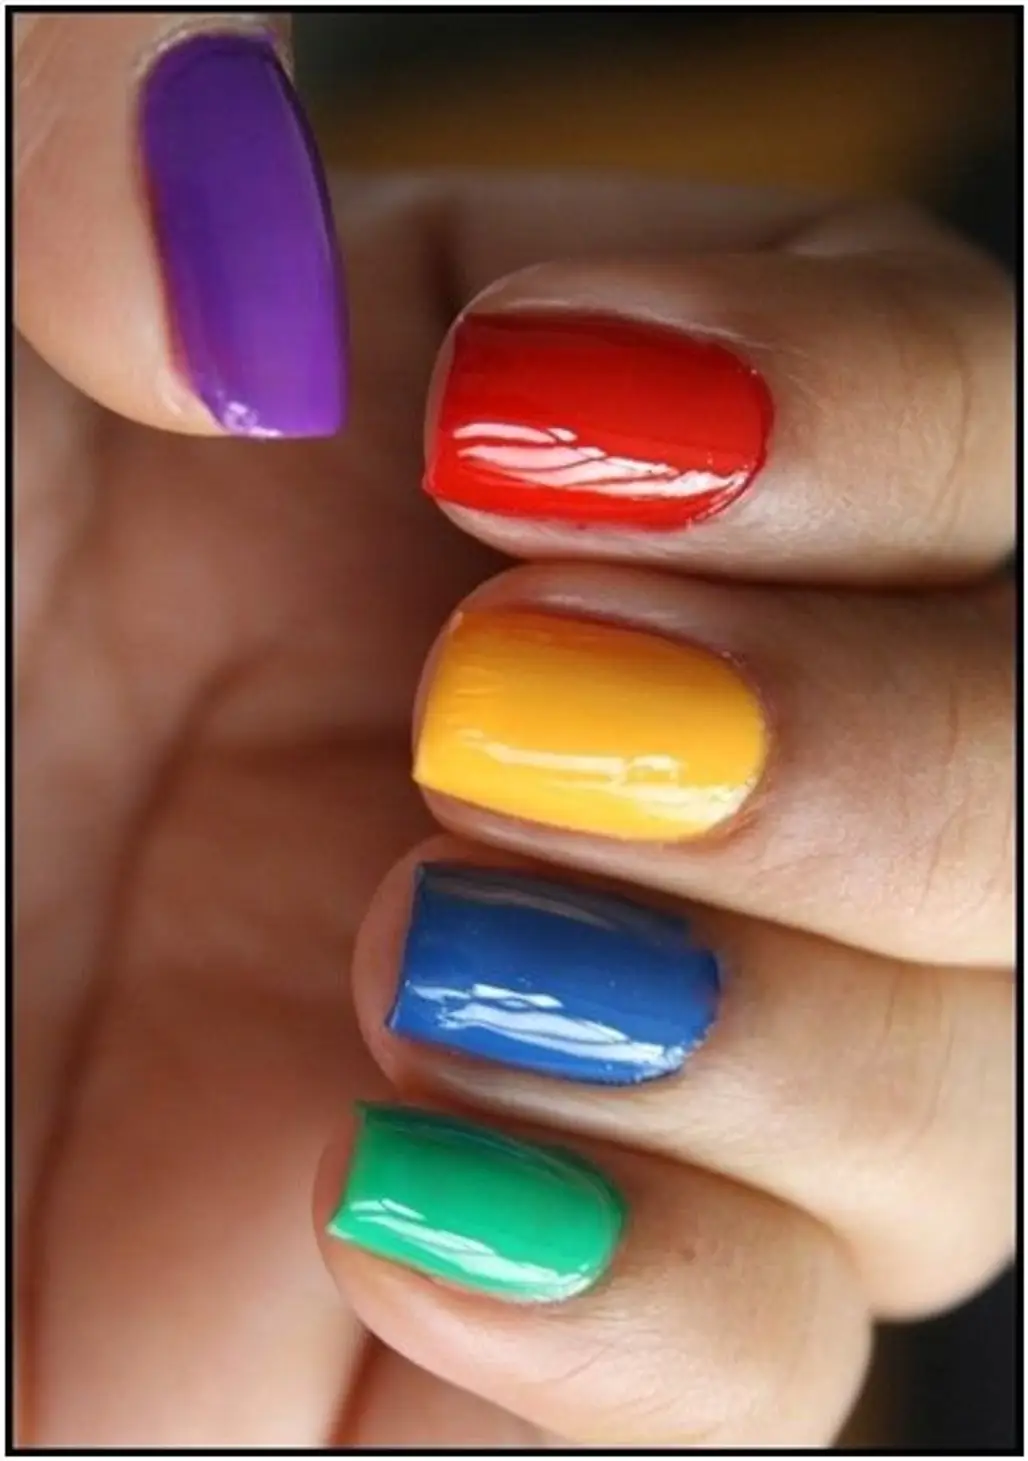 Each Nail a Different Color